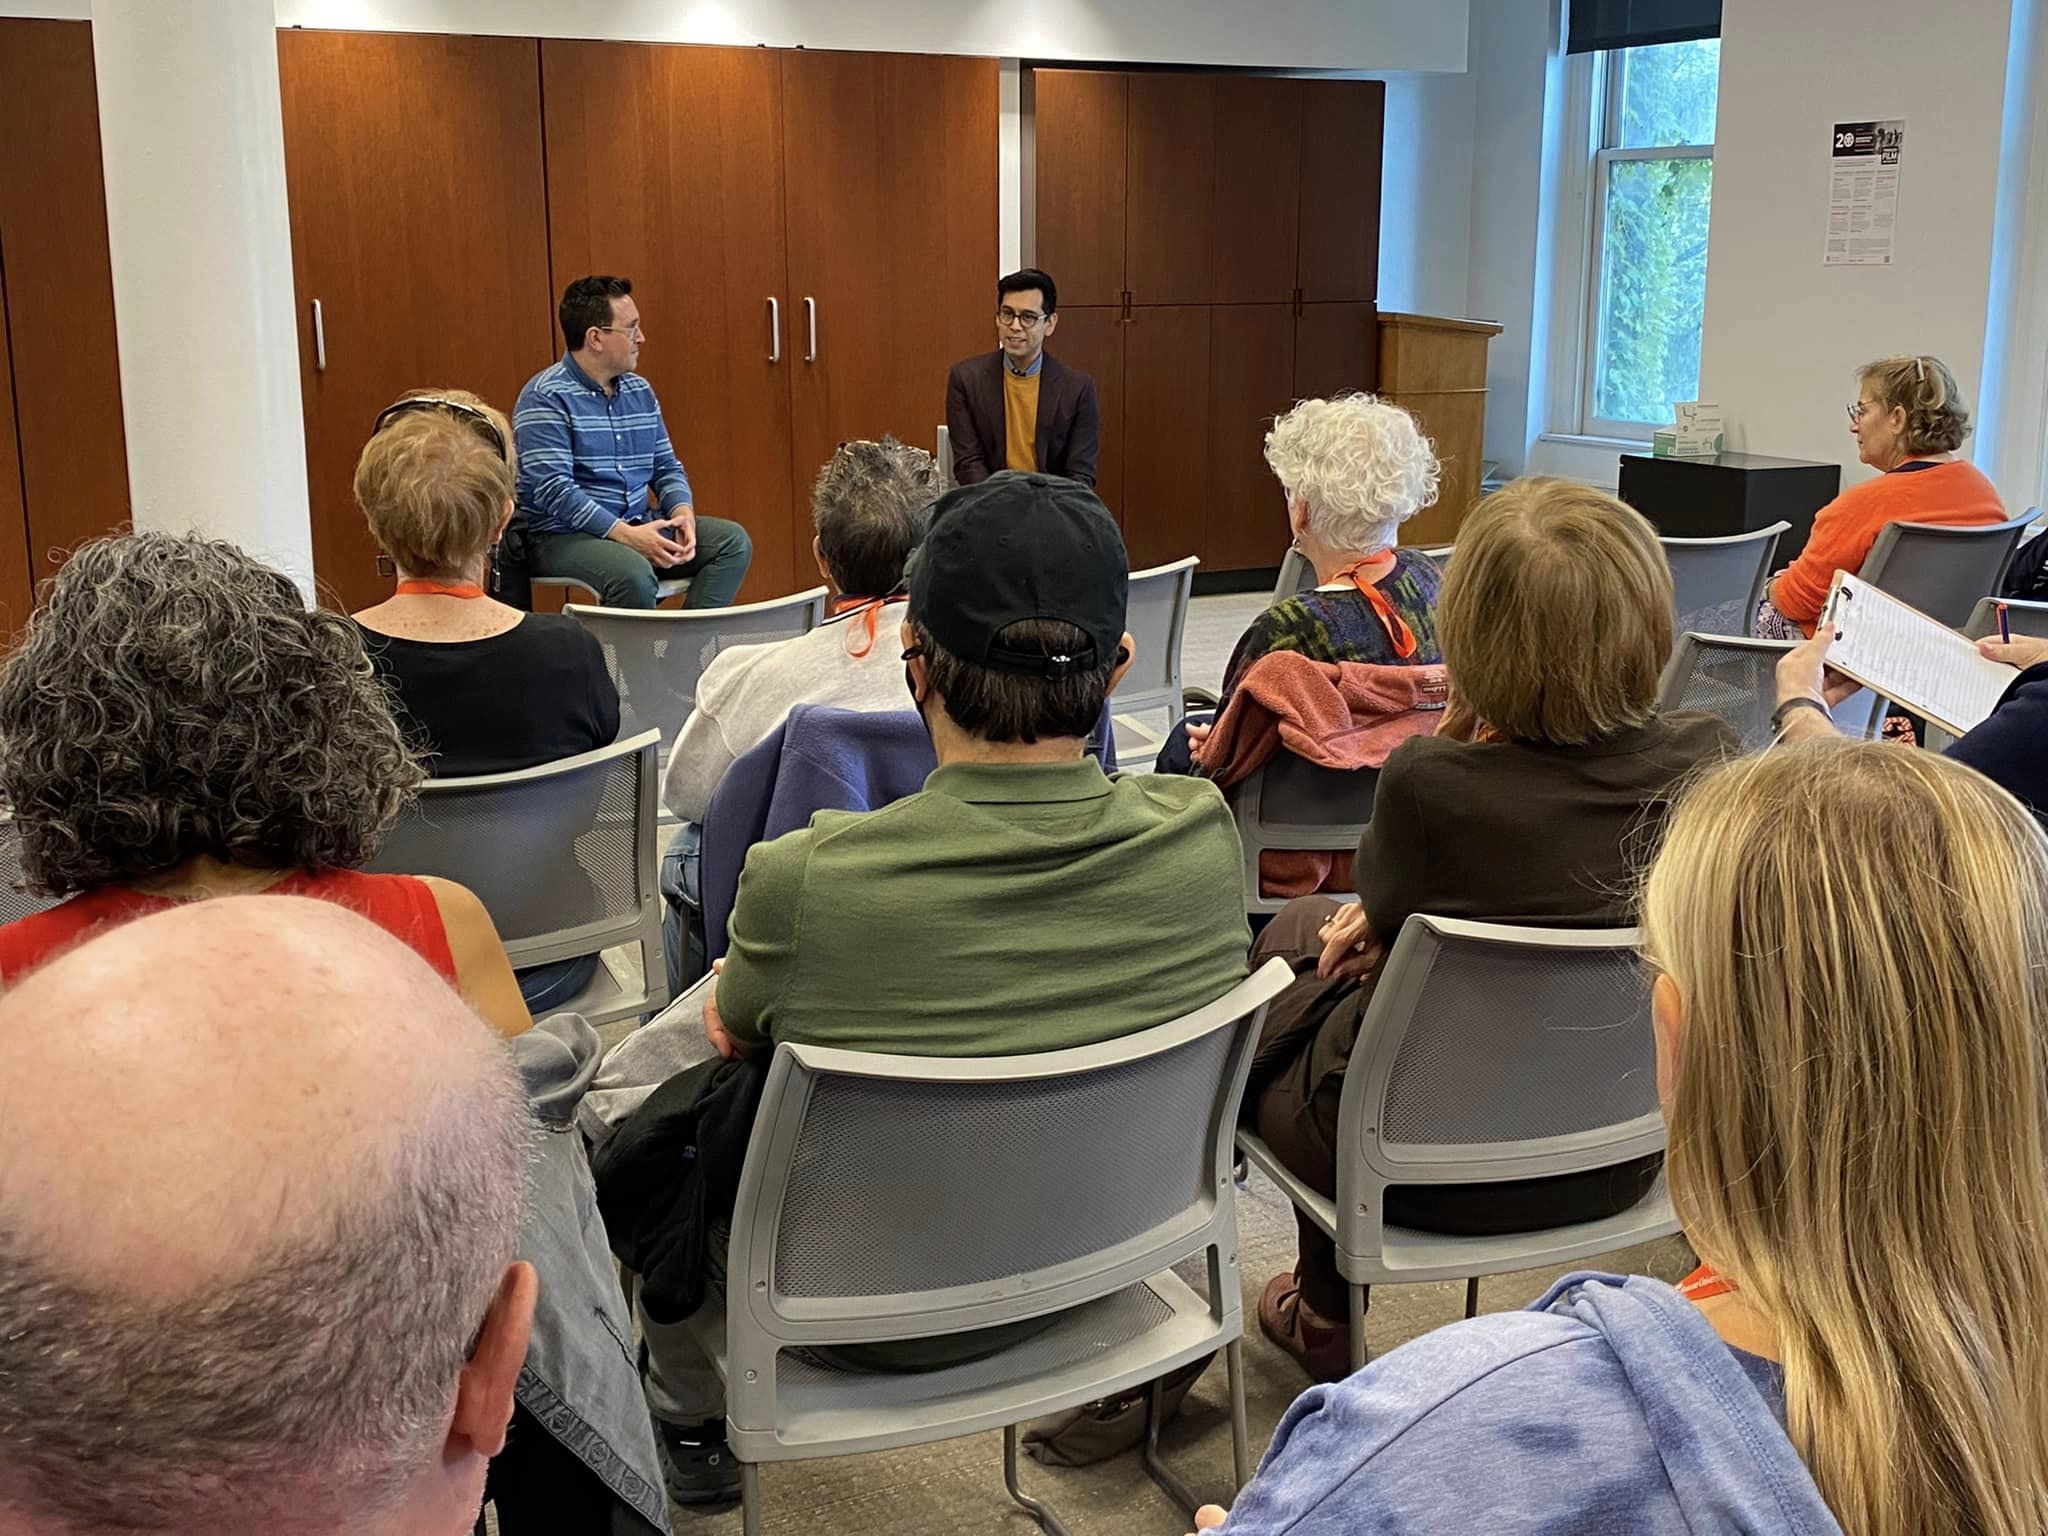 Broadway Bound with Ben Holtzman and Sammy Lopez, producers of “How to Dance in Ohio,” a musical making its world premiere at Syracuse Stage, spoke during an Orange Central Back in the Classroom program (photo from the Office of Alumni Engagement).